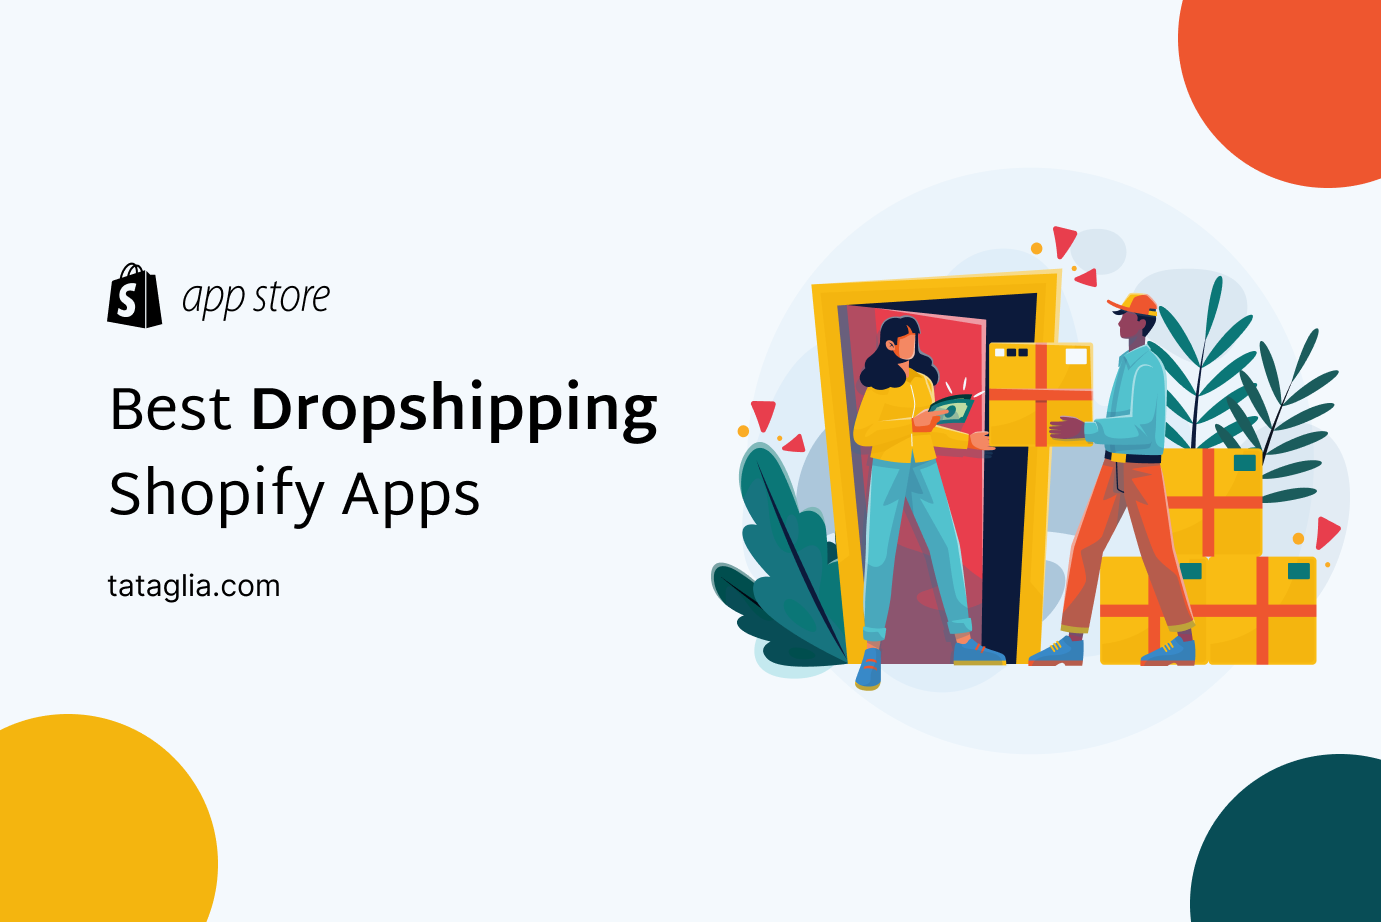 Best Dropshipping Shopify Apps